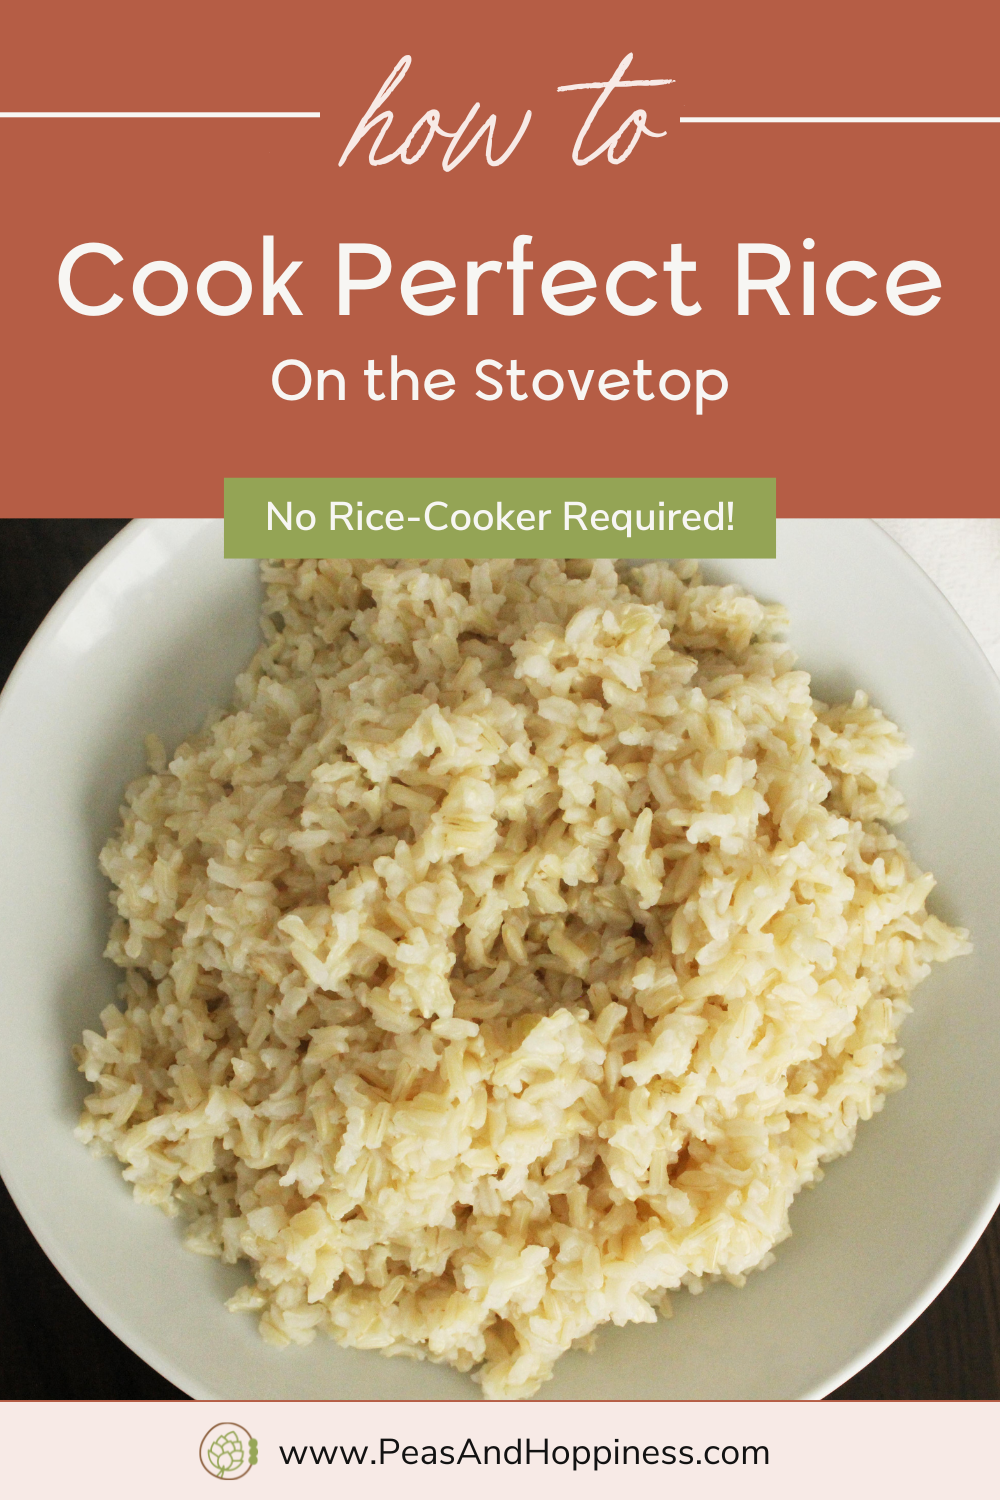 Photo of Brown Rice with Text - How to Cook Perfect Rice on the Stovetop - No Rice-Cooker Required